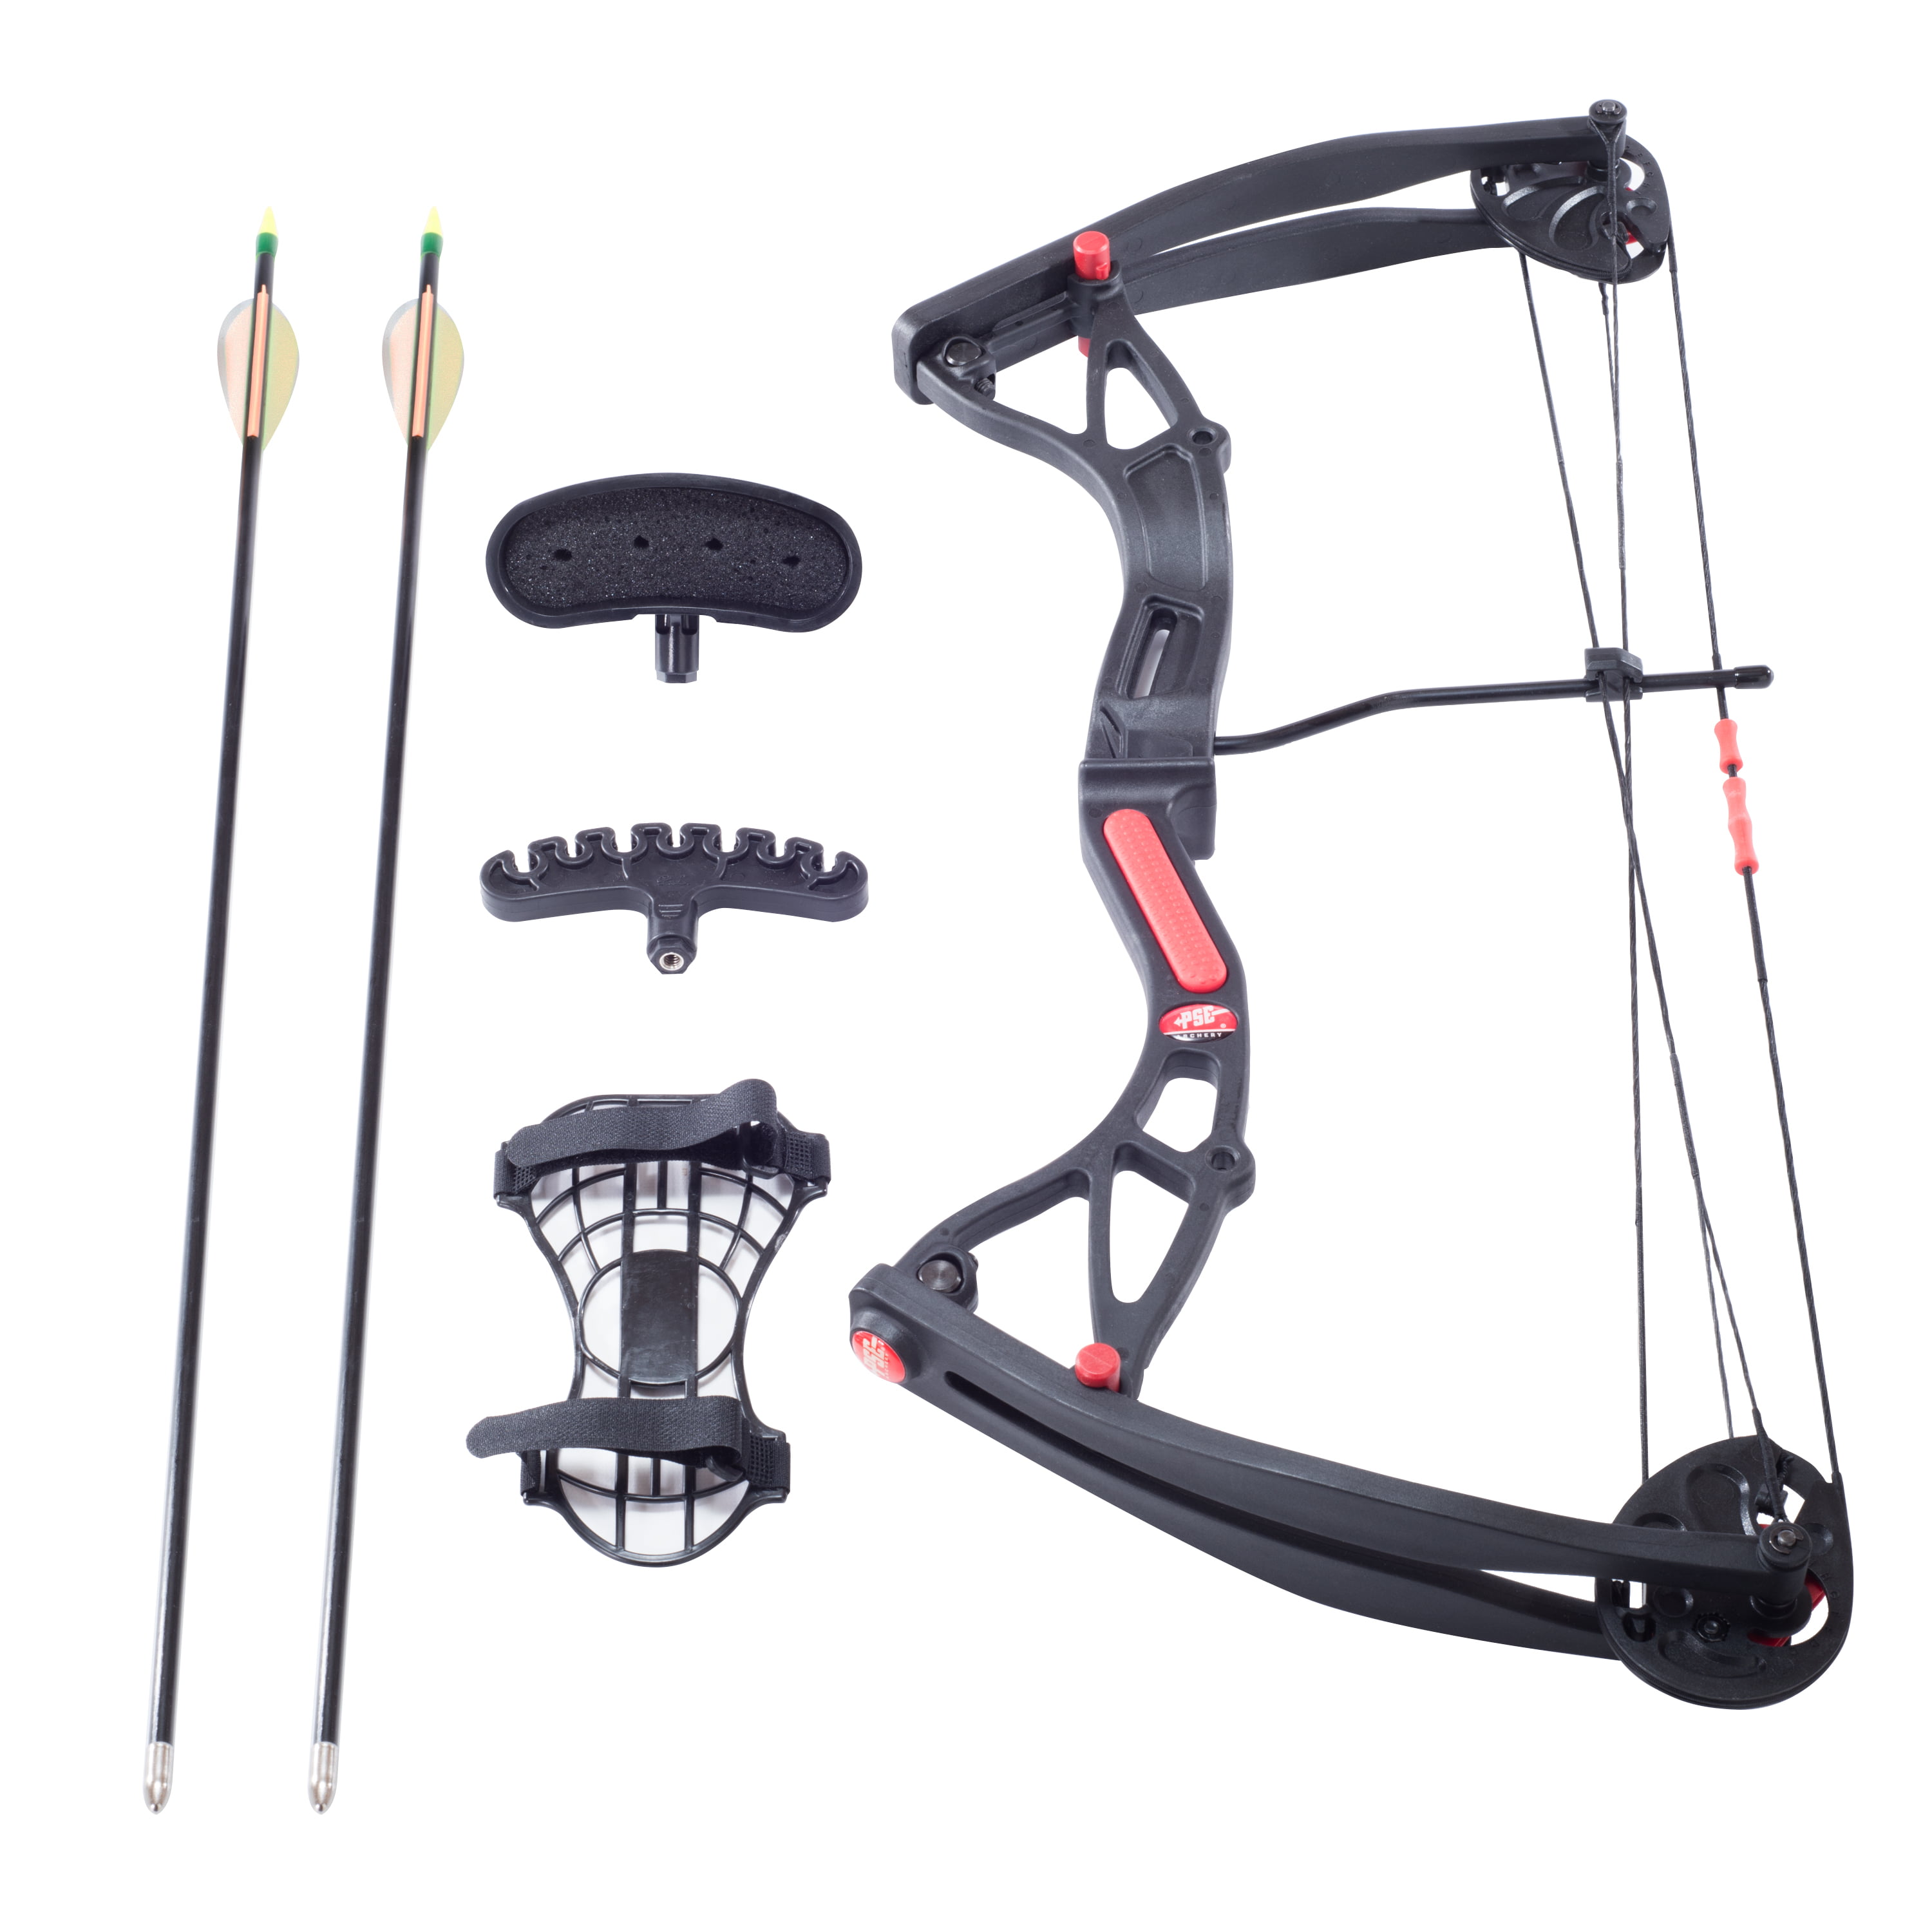 NEW Children's Back Country Toy Compound Bow 